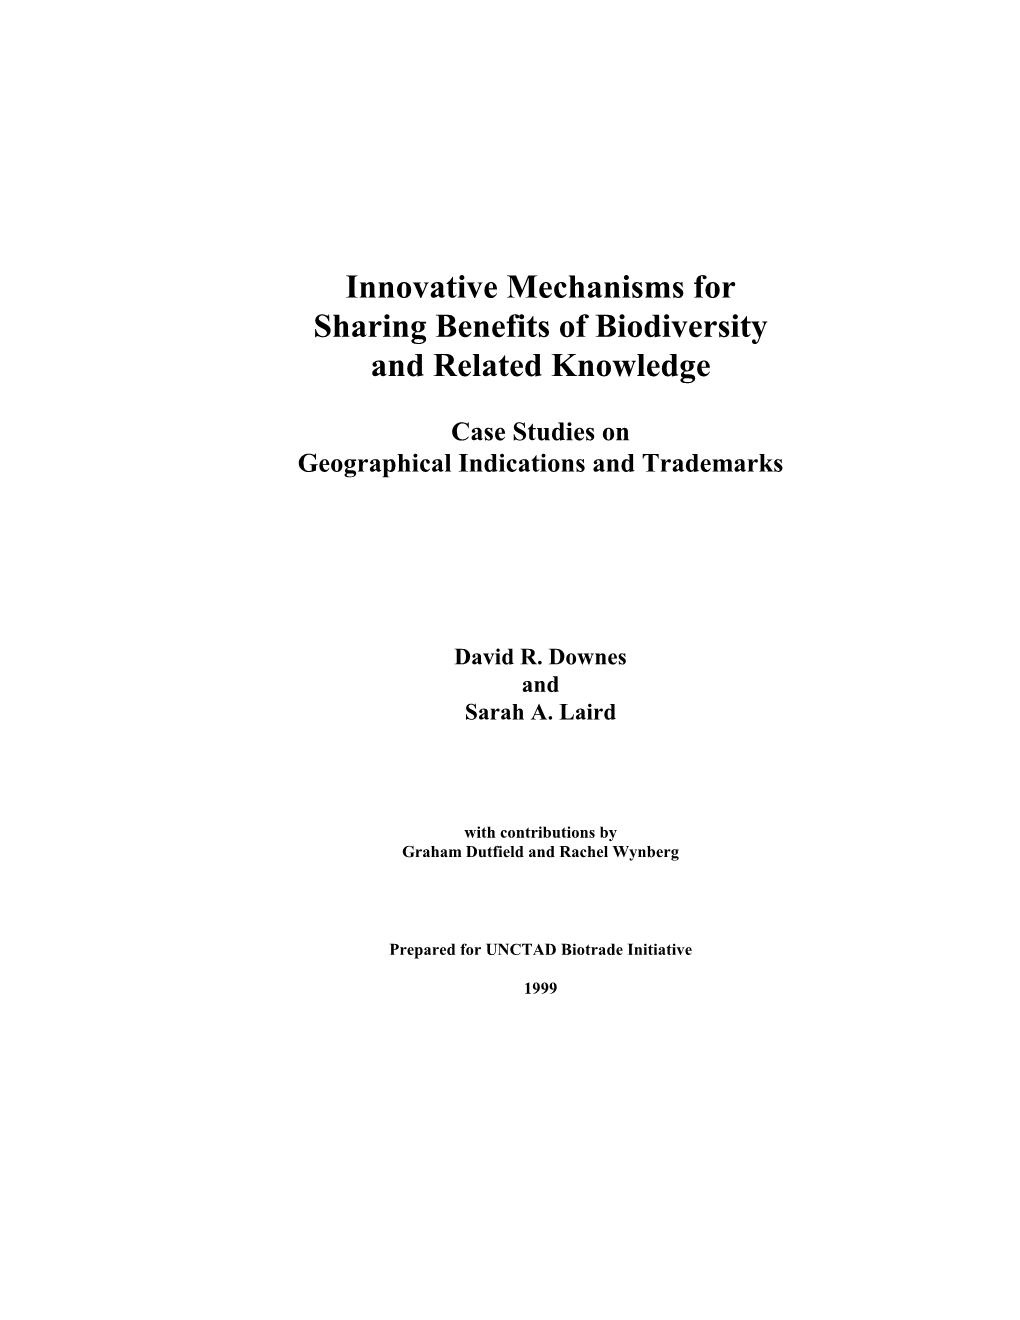 Innovative Mechanisms for Sharing Benefits of Biodiversity and Related Knowledge